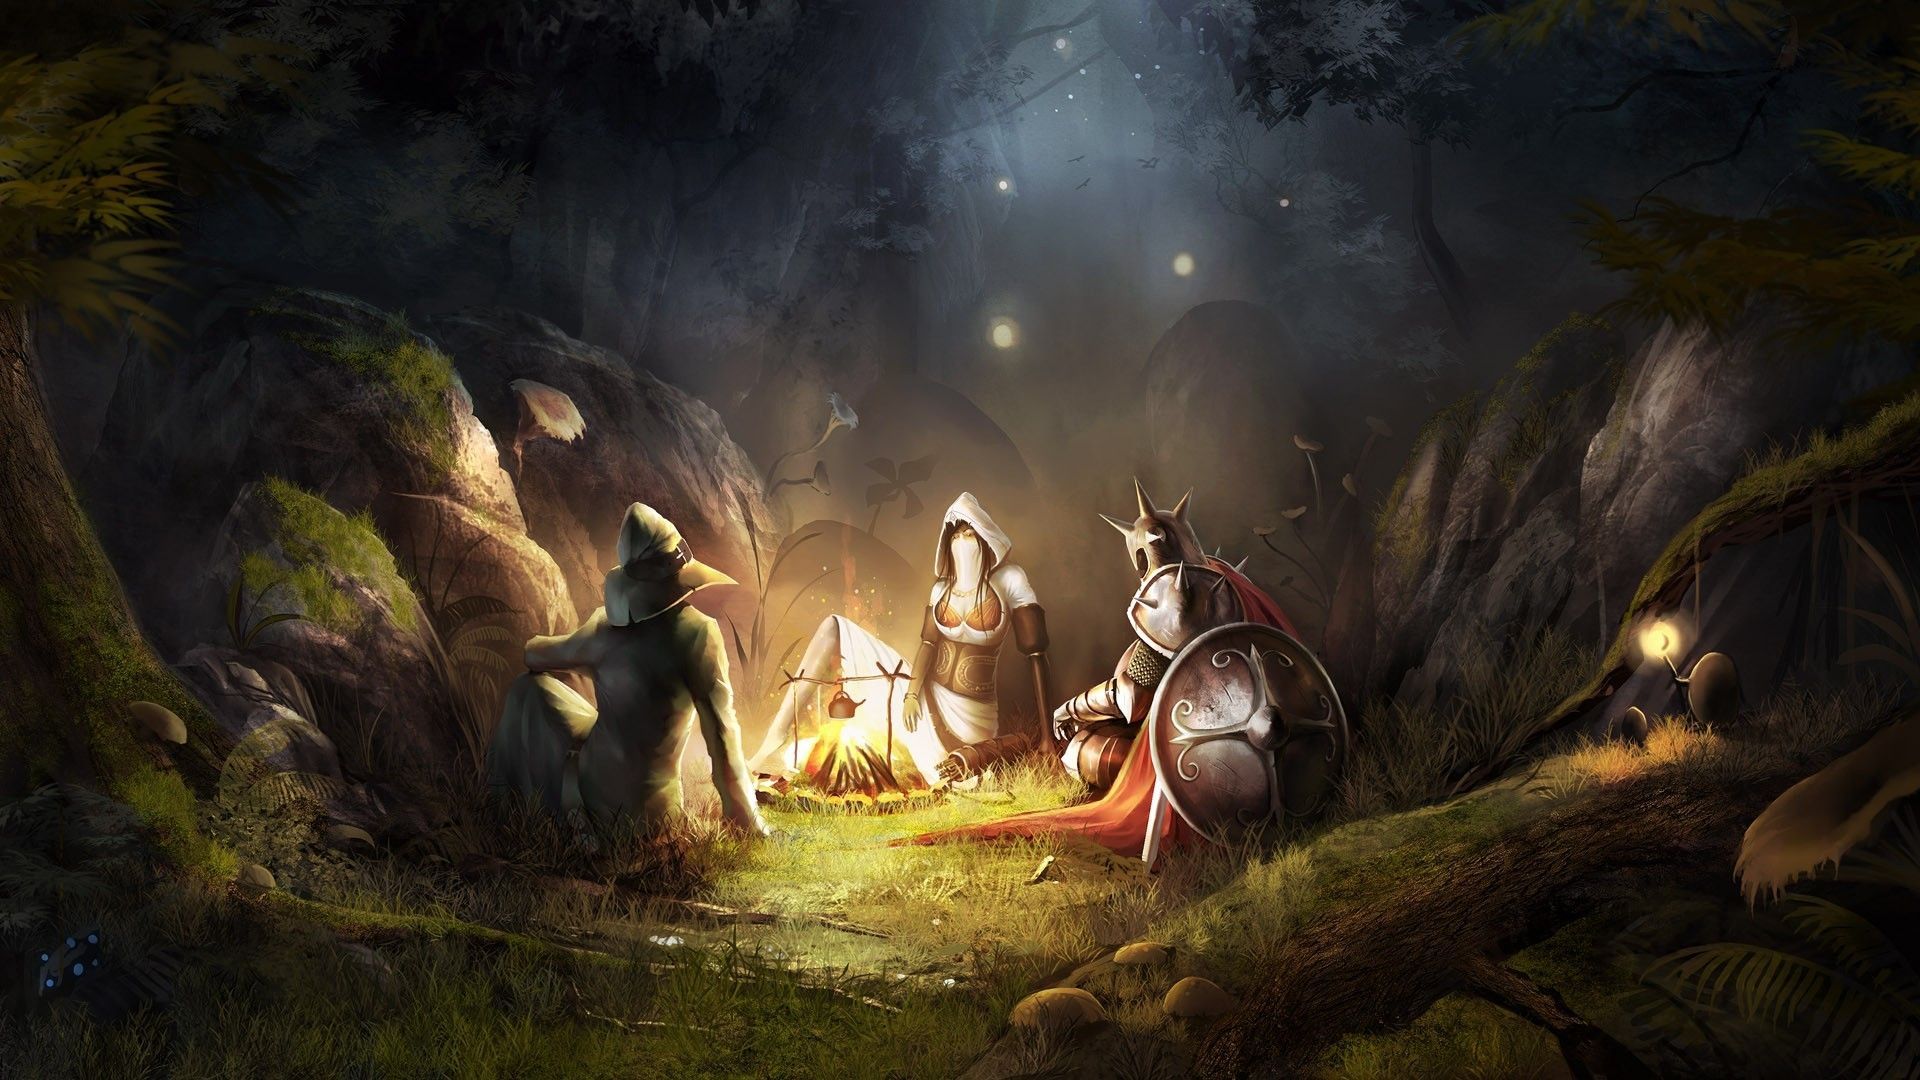 Warriors resting in the forest 2 Wallpaper 24886